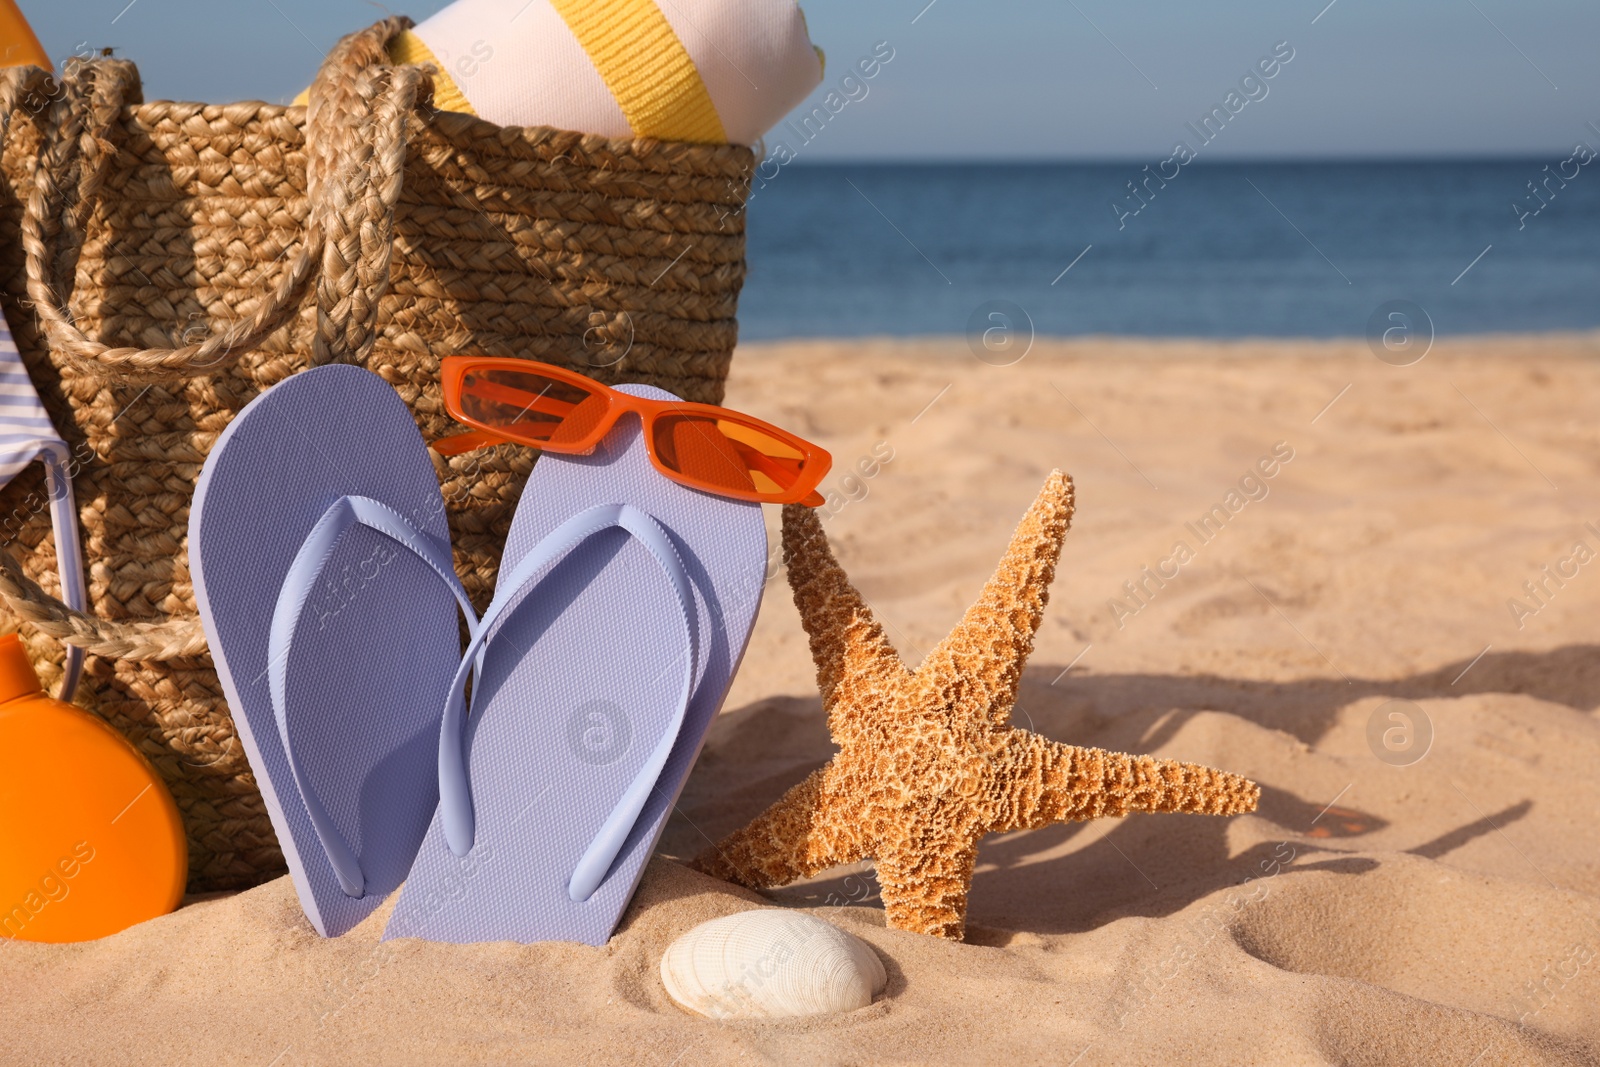 Photo of Bag and beach accessories on sand near sea